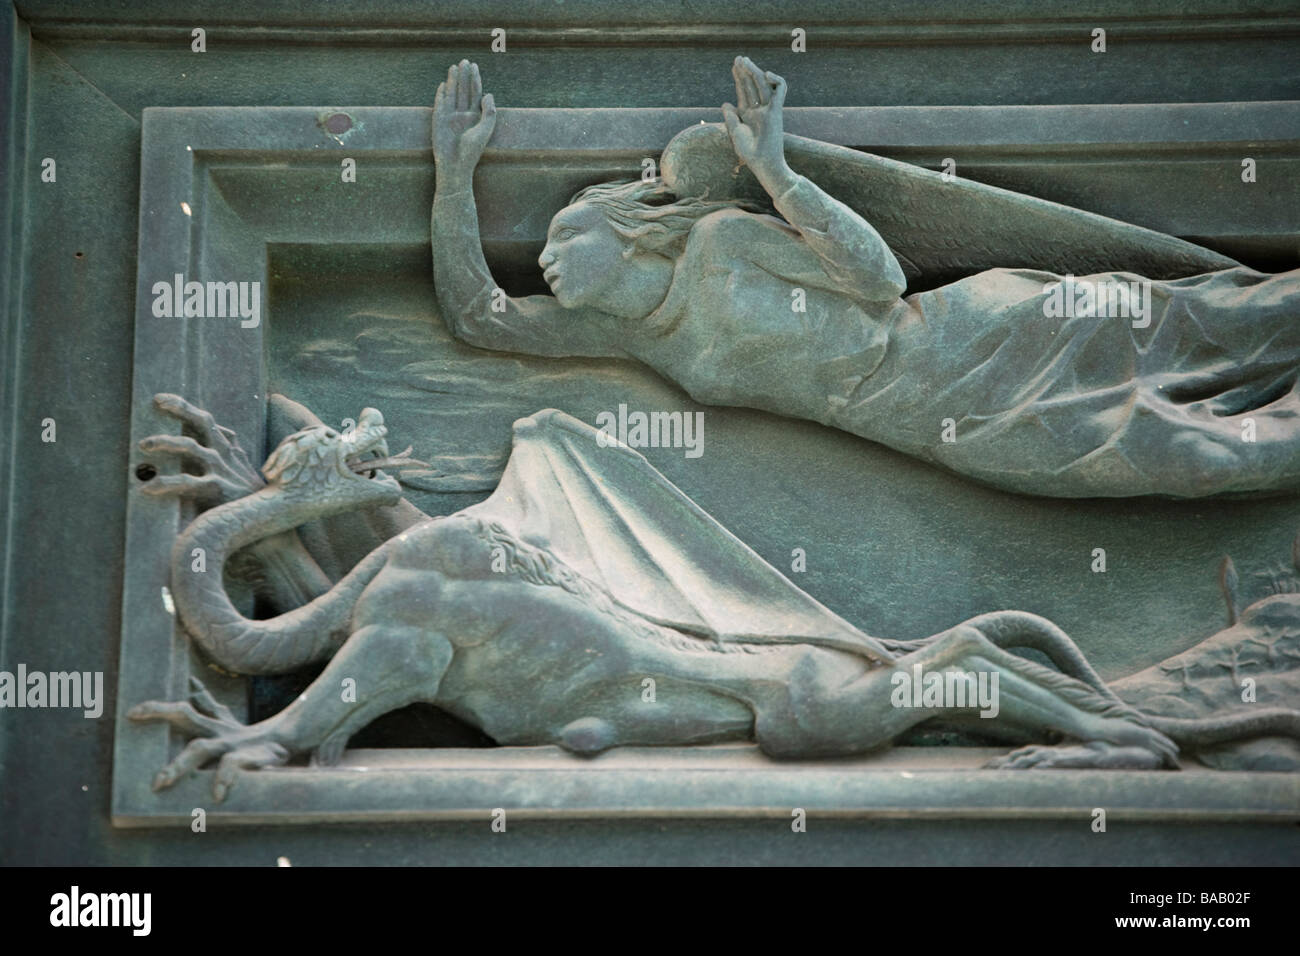 Detail from cast bronze doors to the Duomo (cathedral), Piazza del Duomo, Siena, Tuscany, Italy Stock Photo